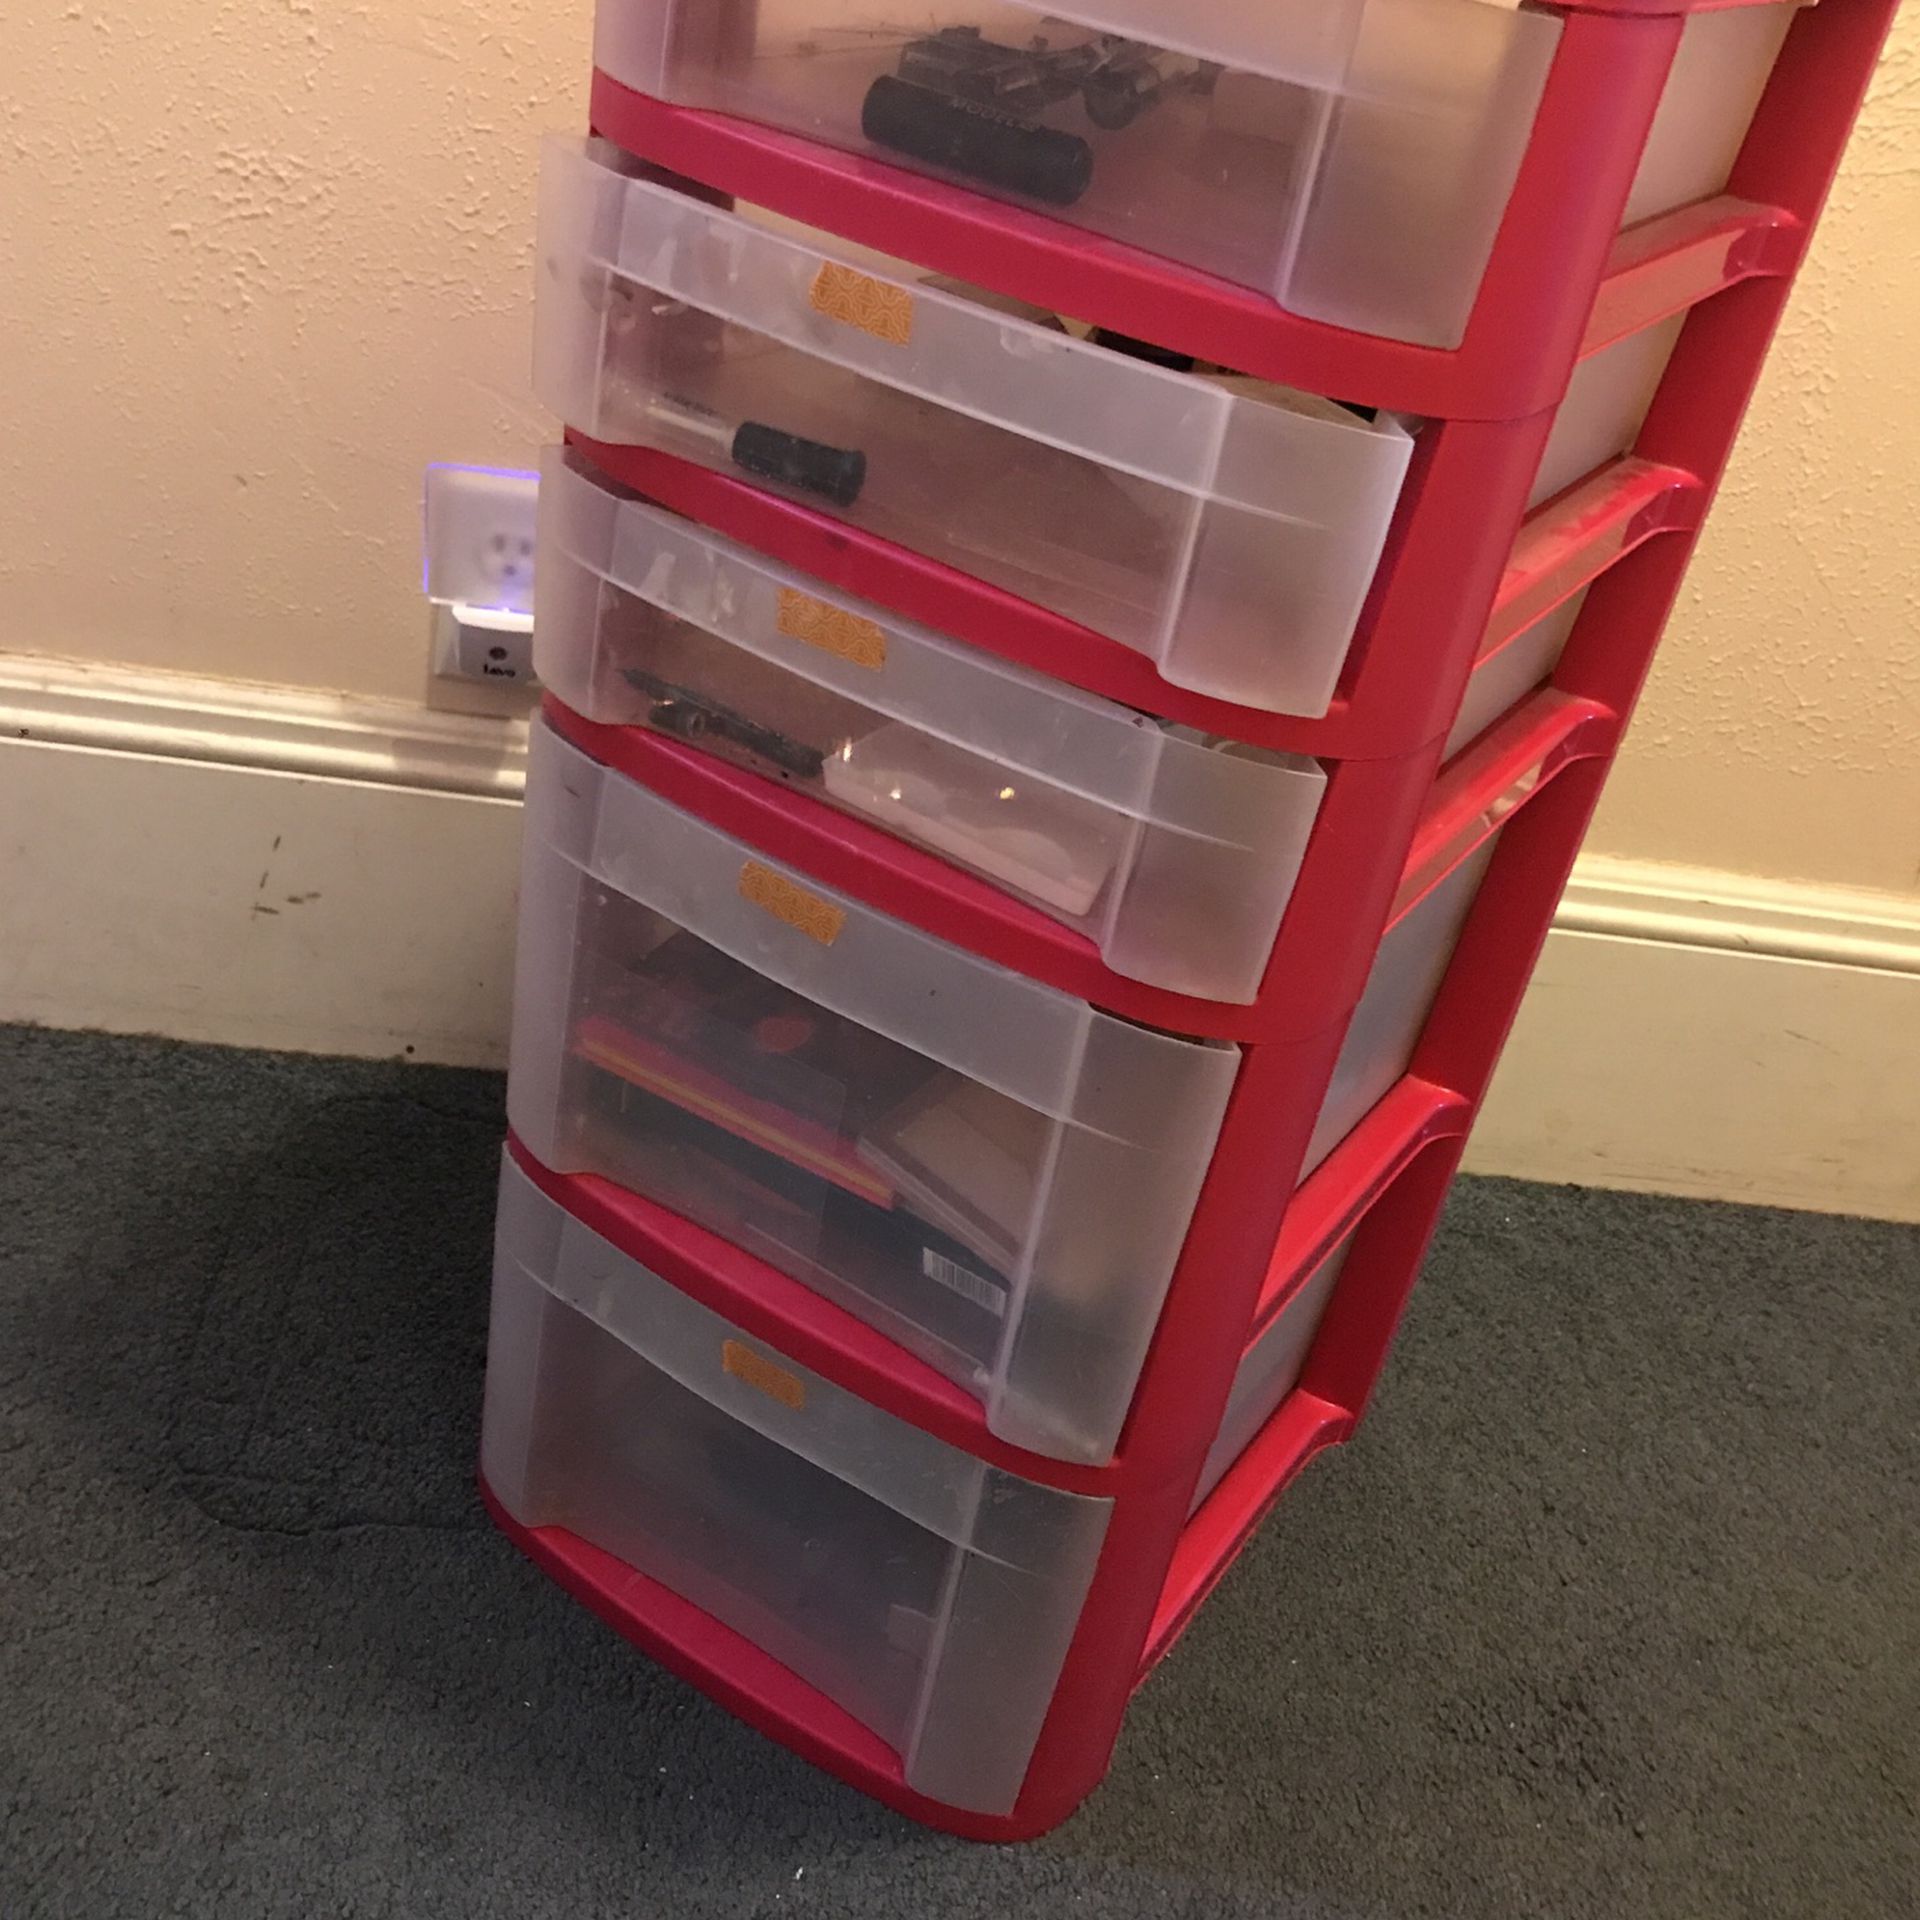 Pink drawers For organizing 